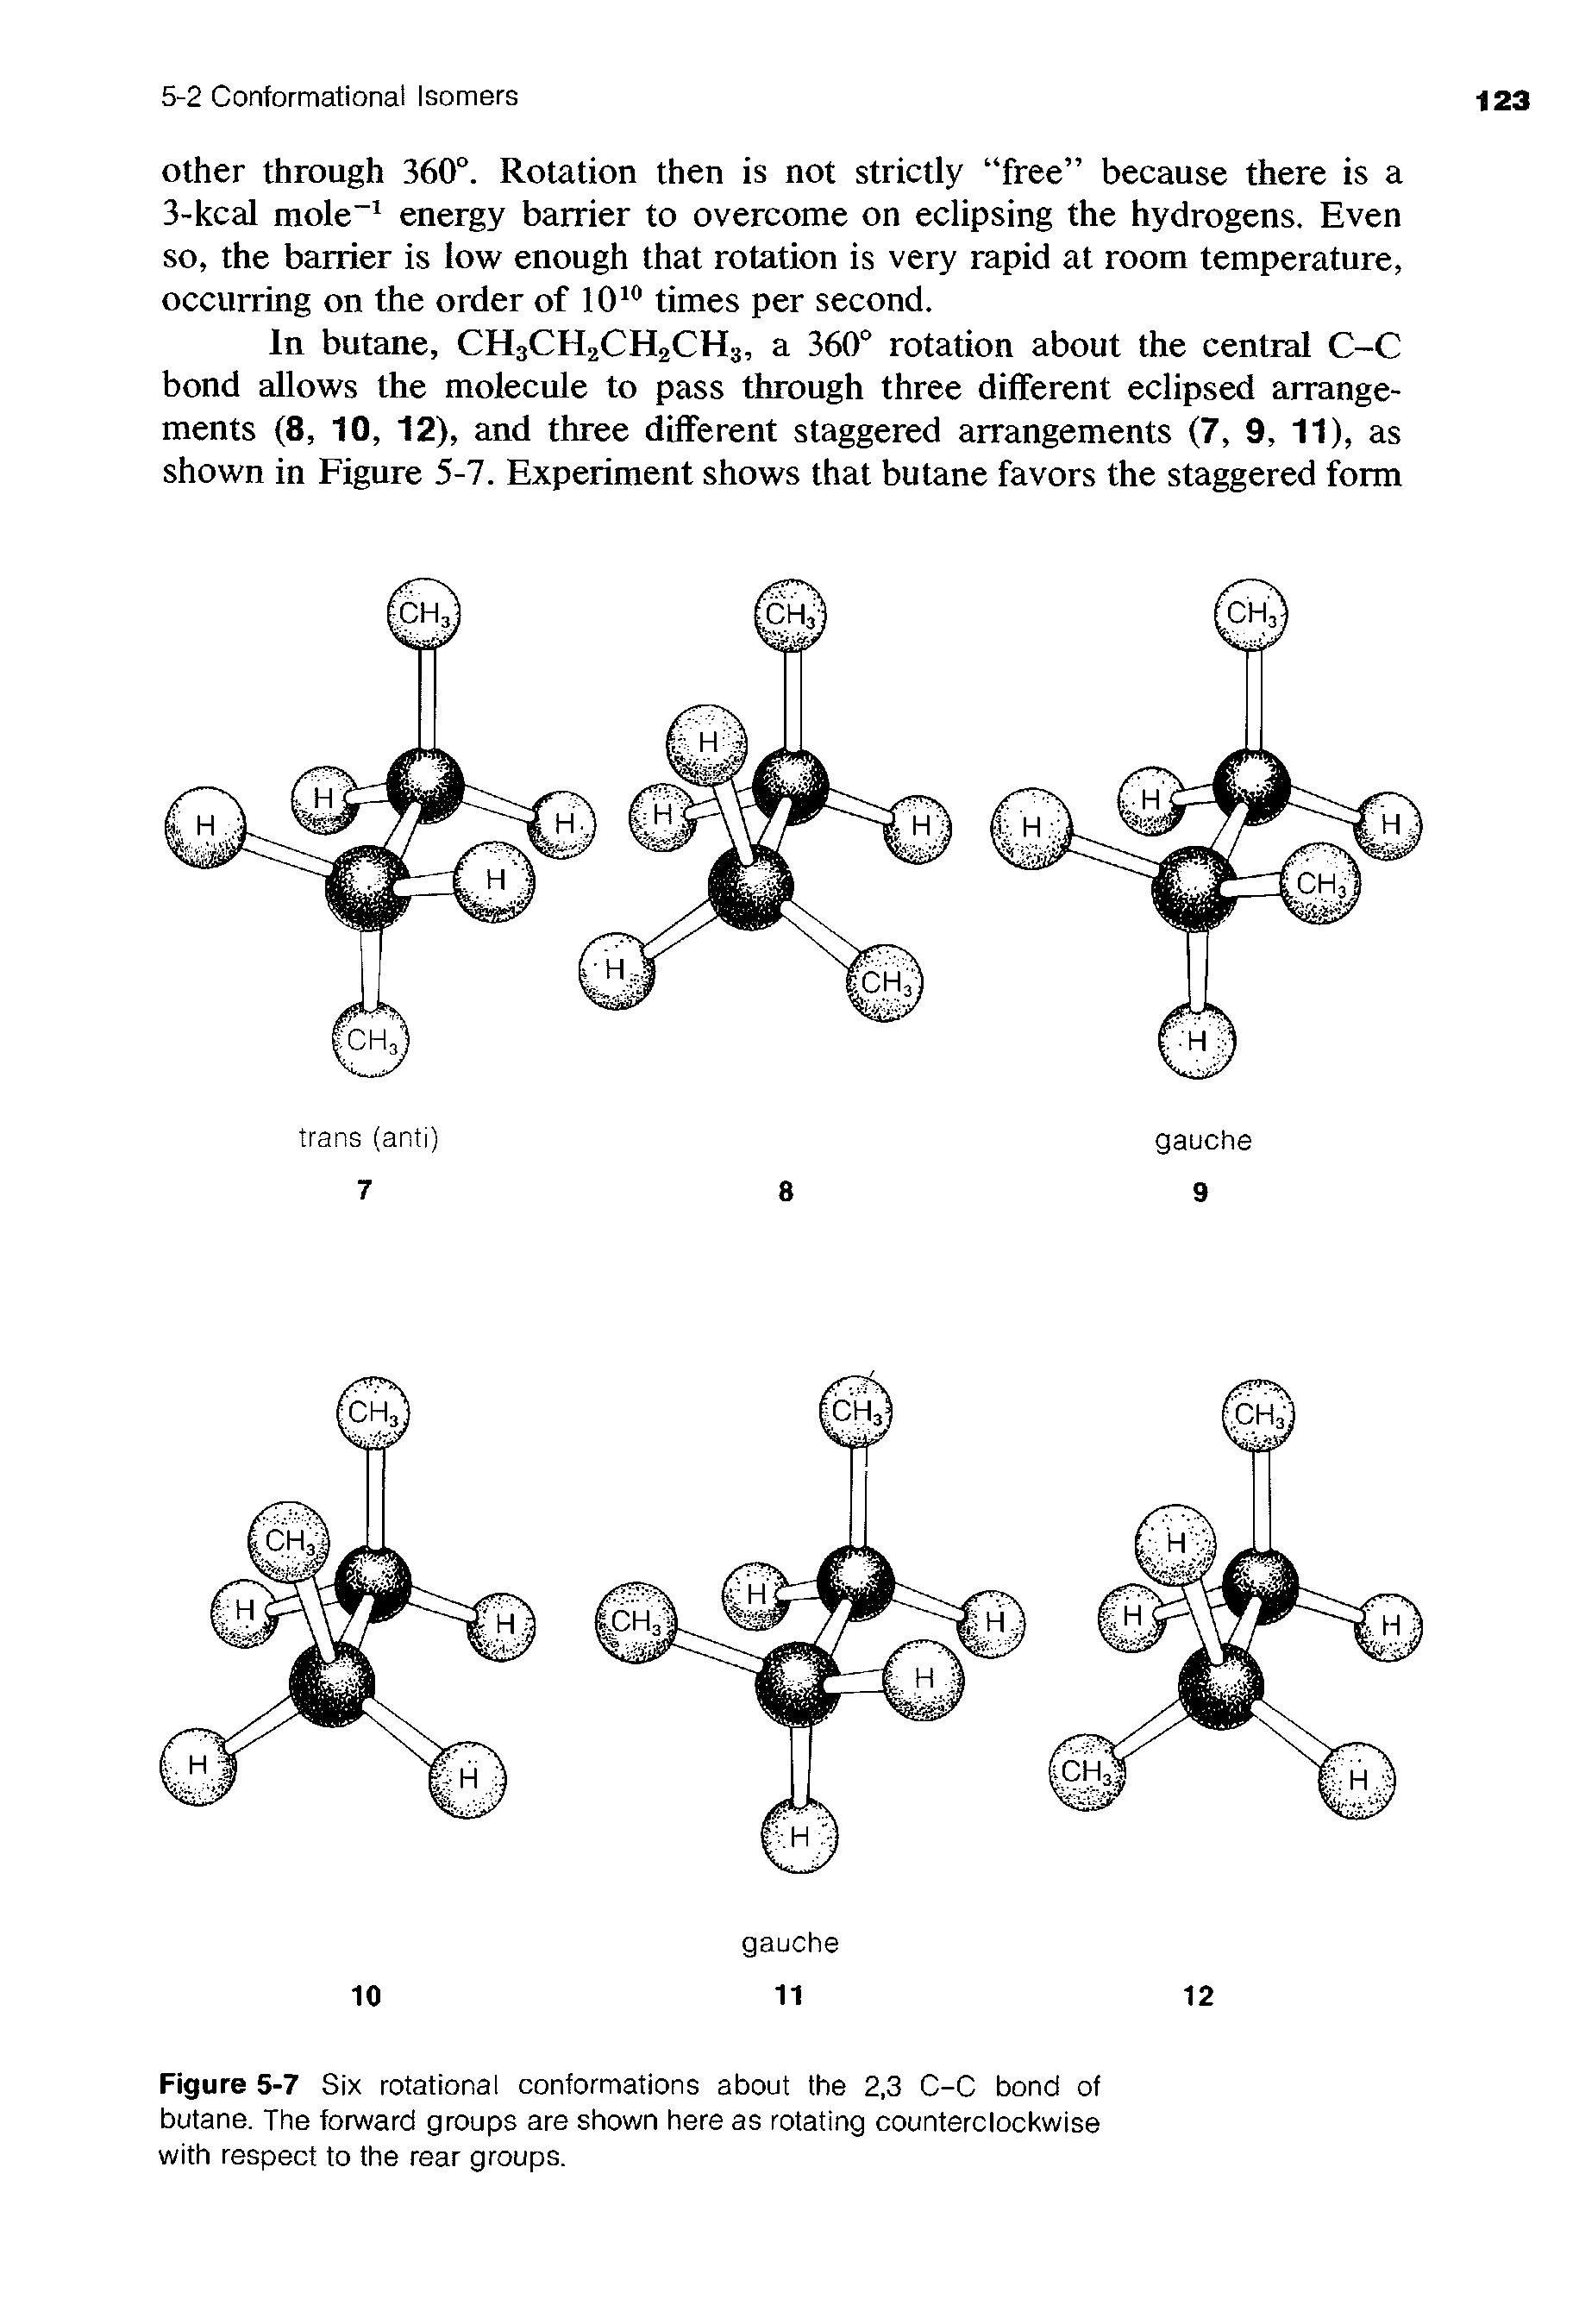 Figure 5-7 Six rotational conformations about the 2,3 C-C bond of butane. The forward groups are shown here as rotating counterclockwise with respect to the rear groups.